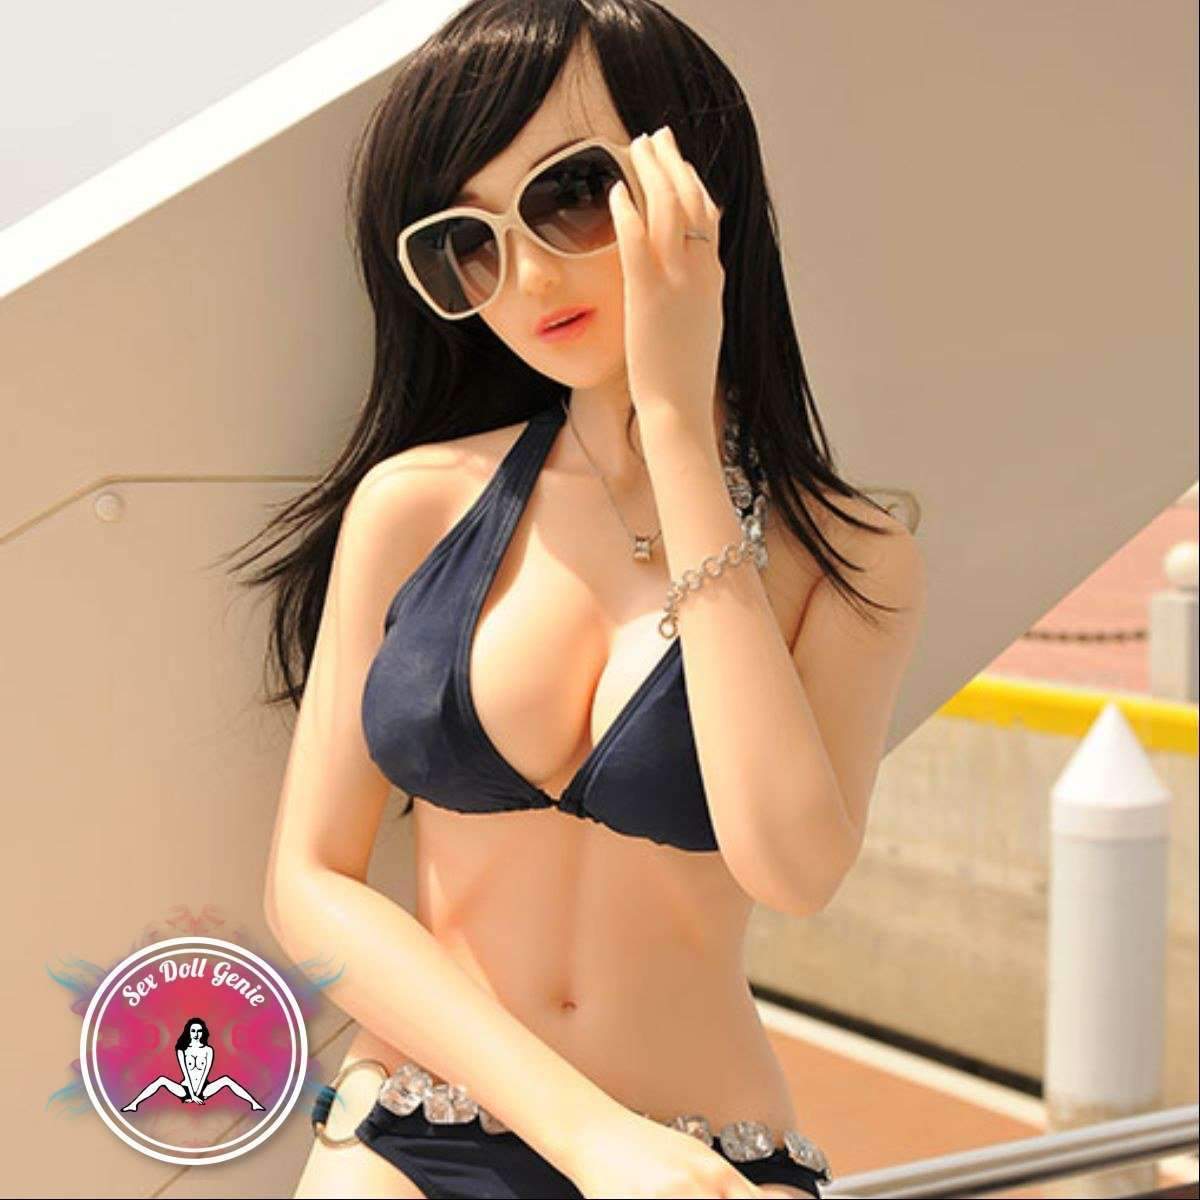 DS Doll - 163Plus - Jiaxin Head - Type 4 D Cup Silicone Doll-15